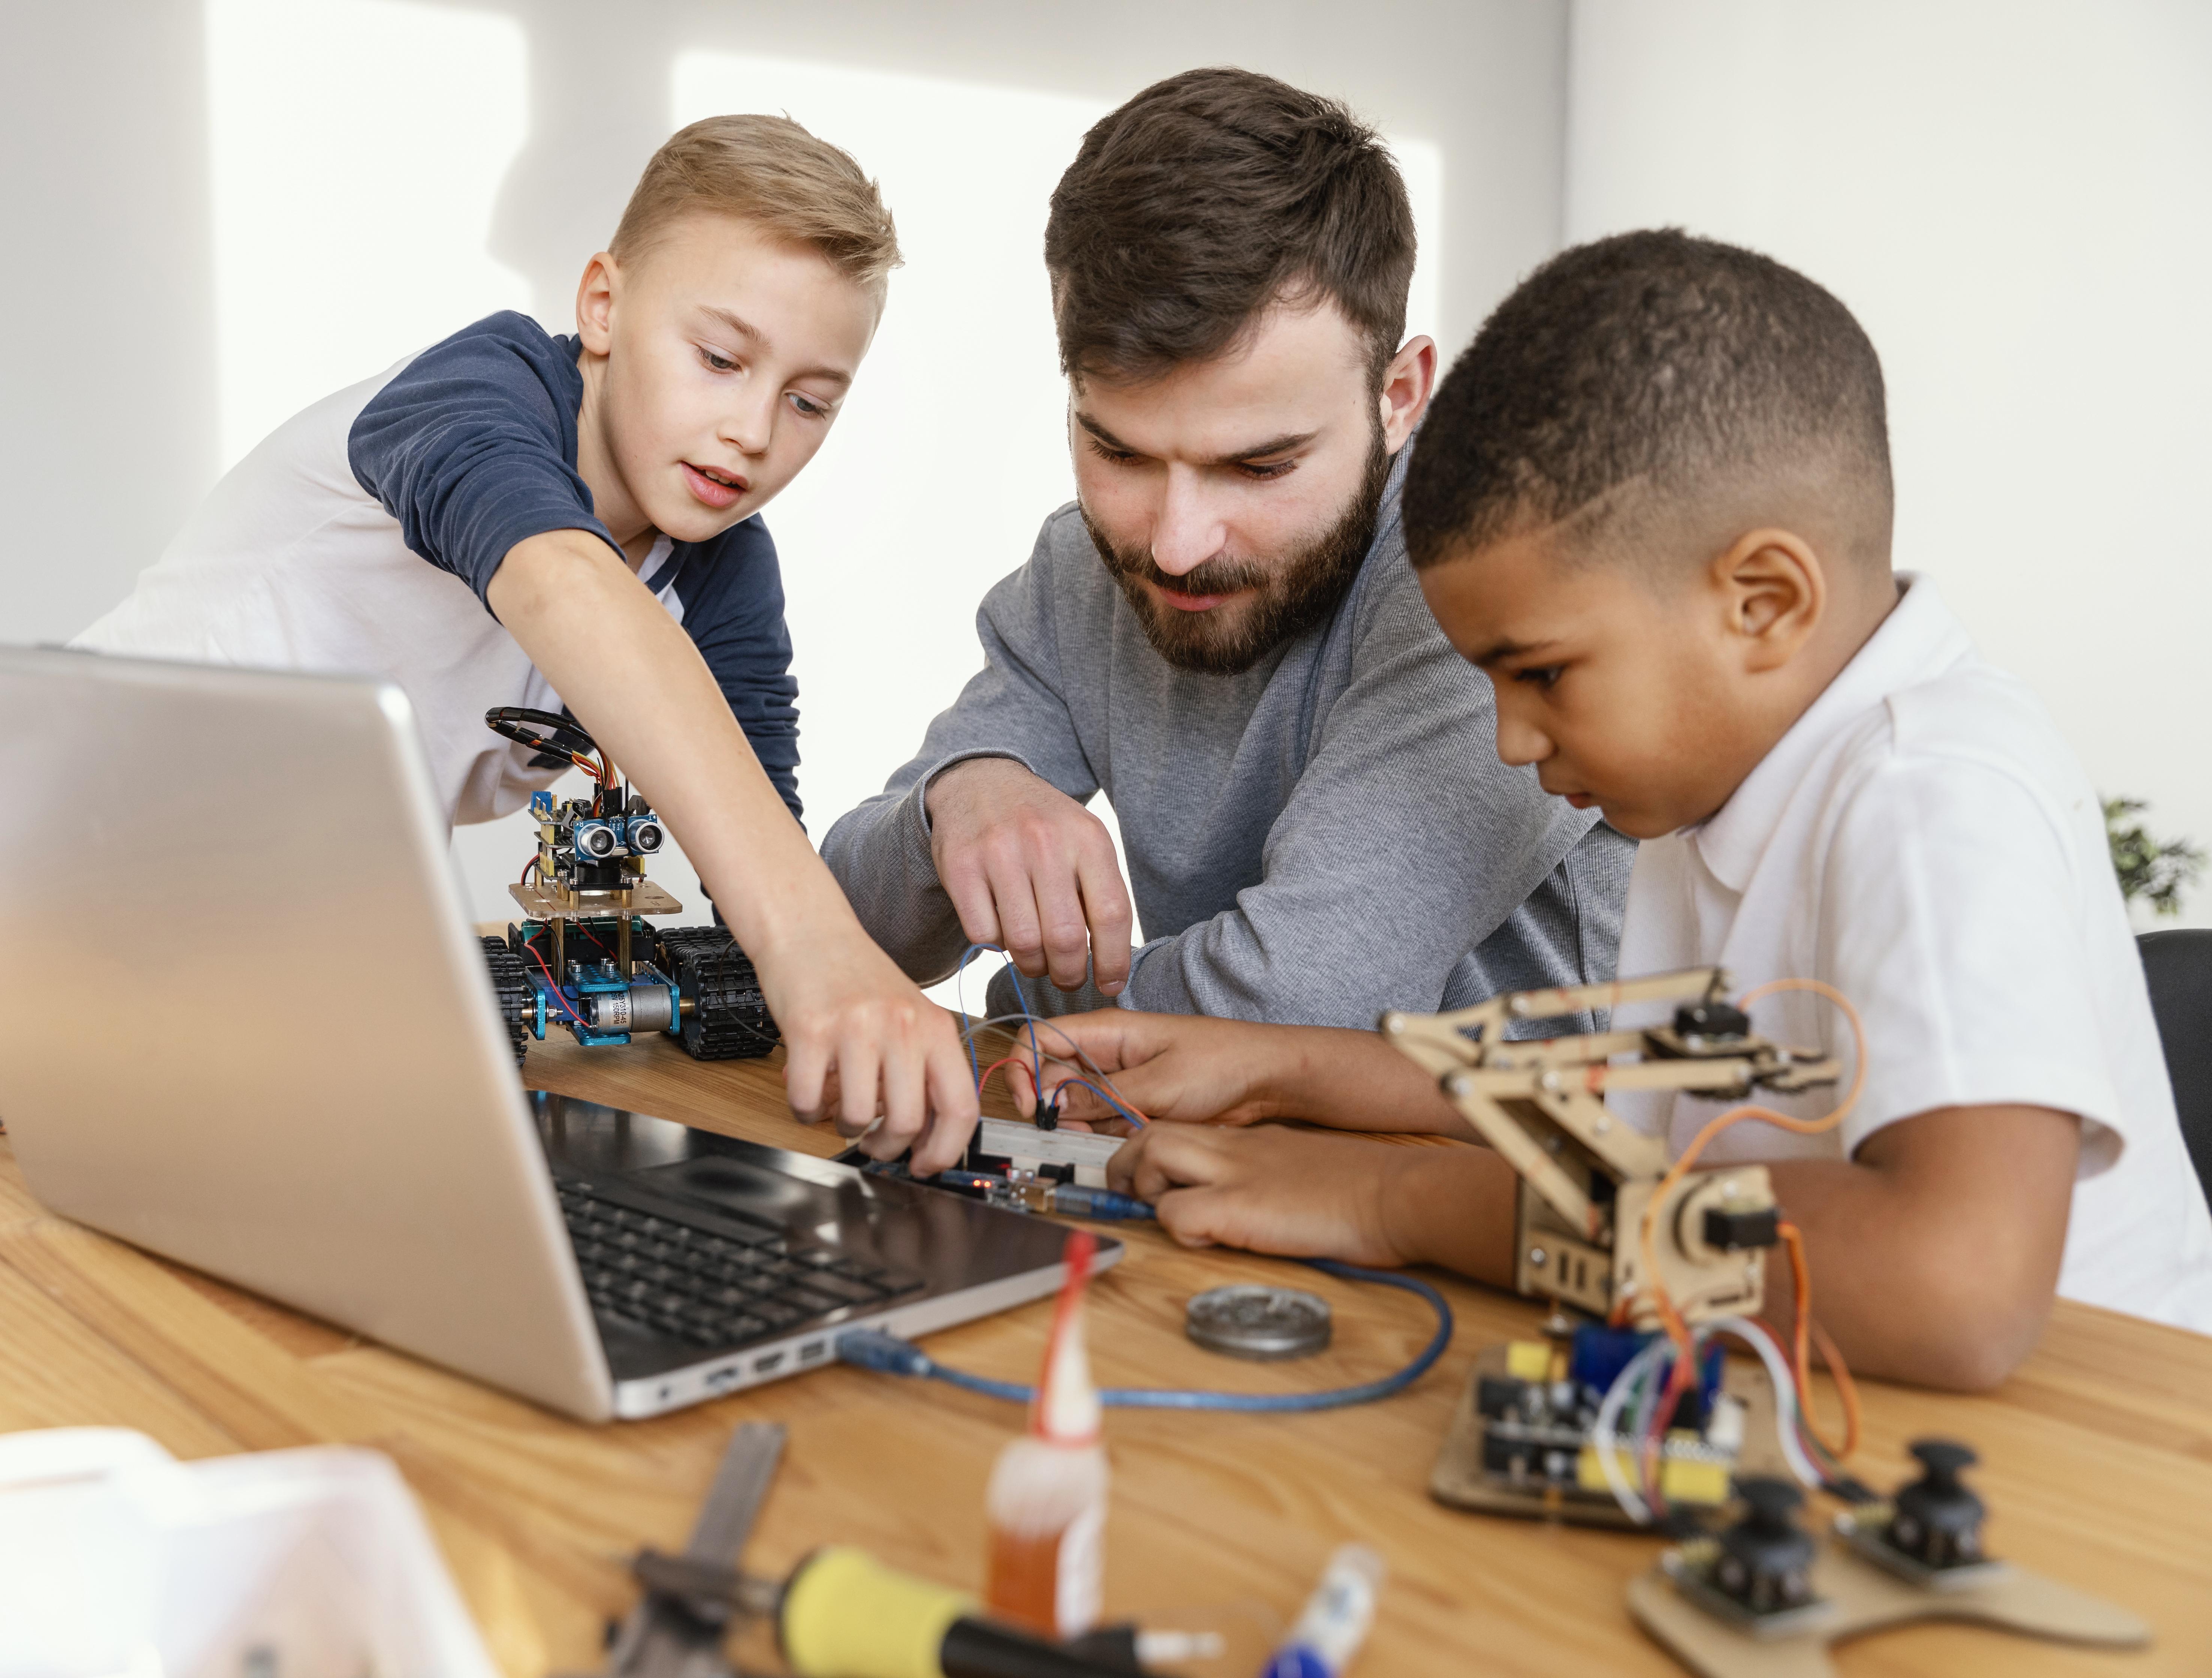 two kids and 1 adult building robots